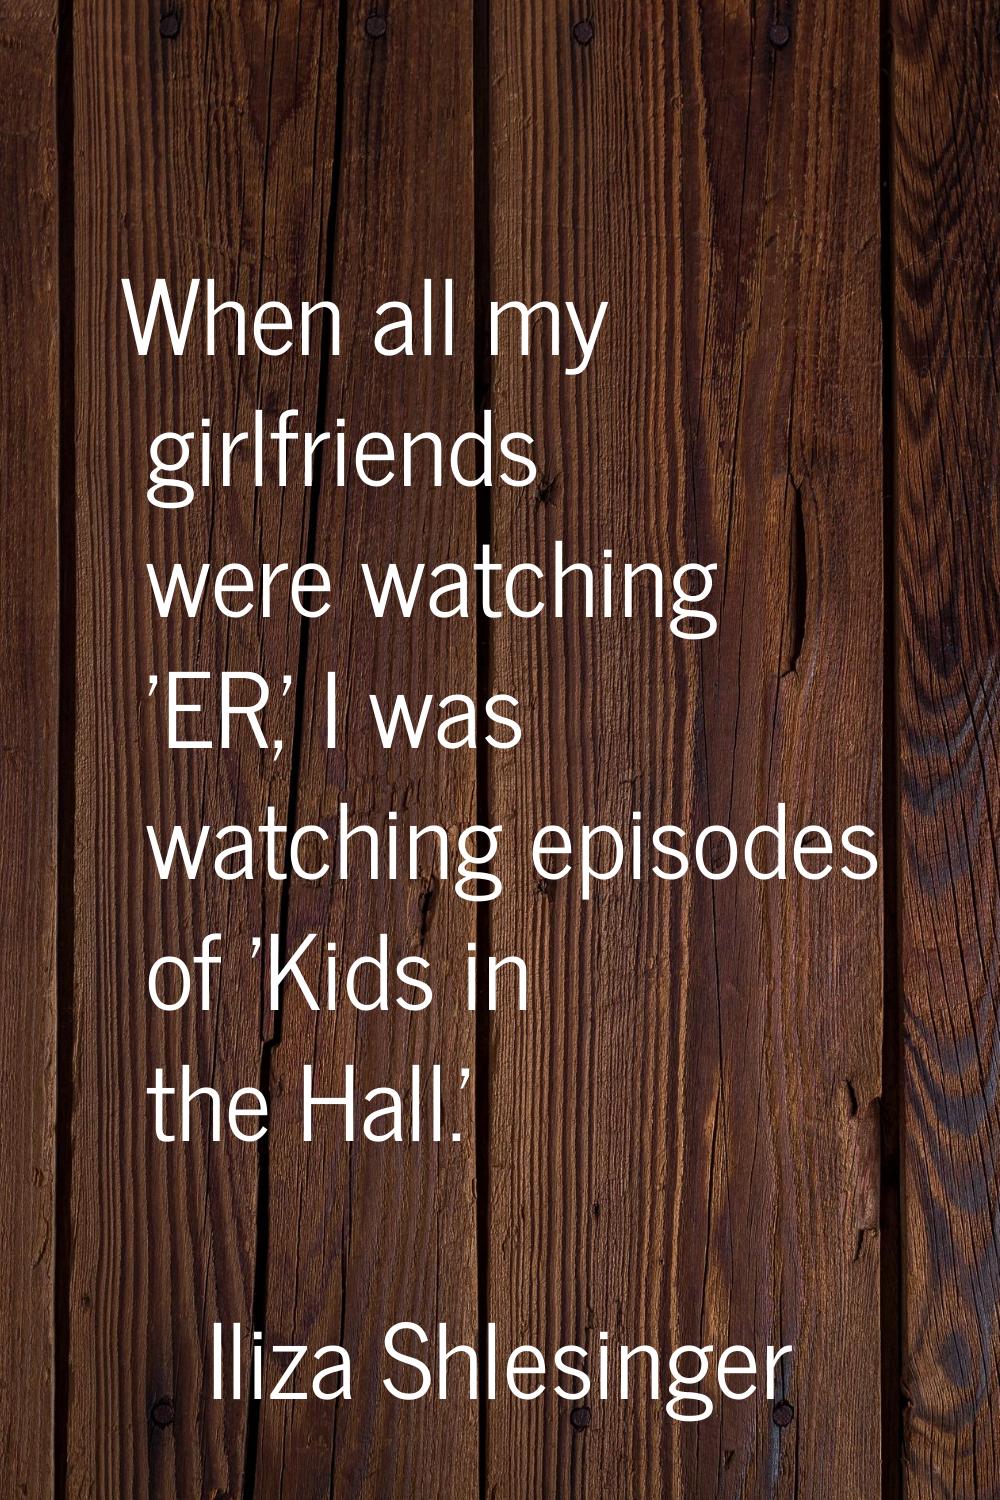 When all my girlfriends were watching 'ER,' I was watching episodes of 'Kids in the Hall.'